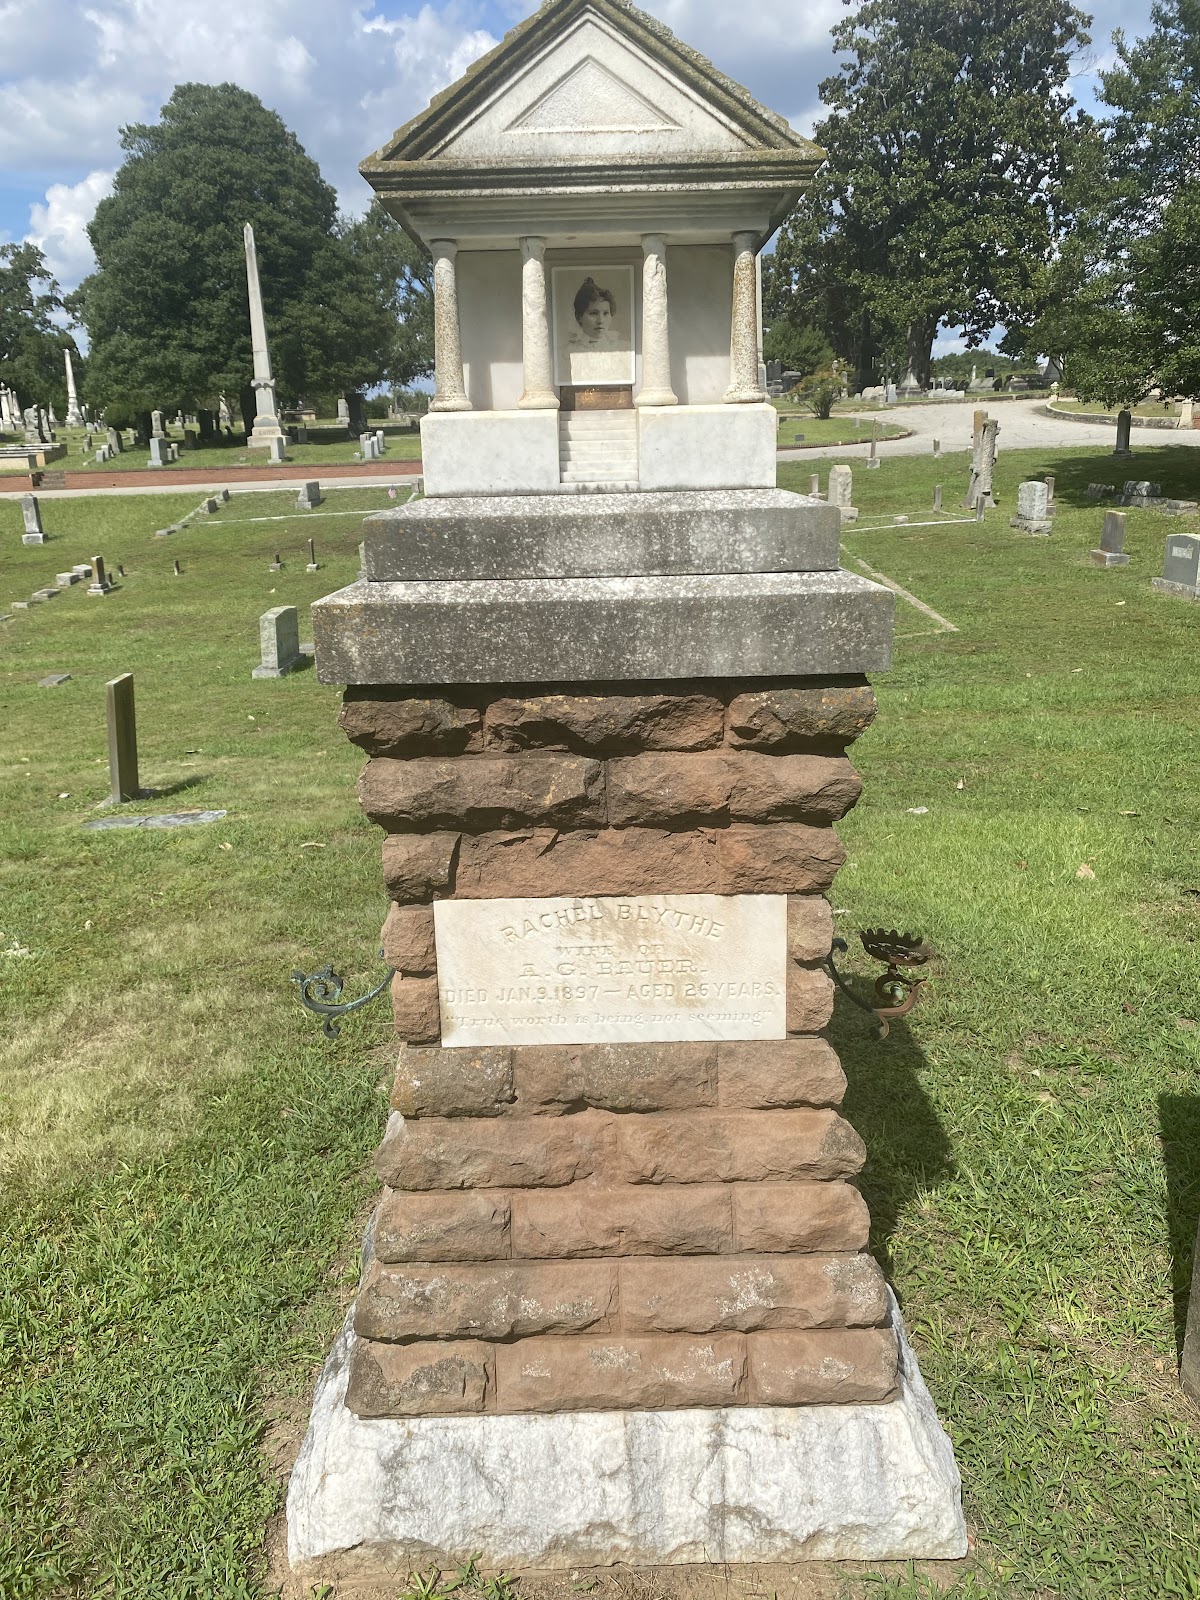 A grave marker with a rough cut marble base and rough cut brown brick.  It is topped with a small replica of a temple and showcases a portrait of Rachael.  It has a name placard that reads Rachael Blythe, wife of A. G. Bauer died January 9, 1897 - aged 26 years.  True worth is being, not seeming.